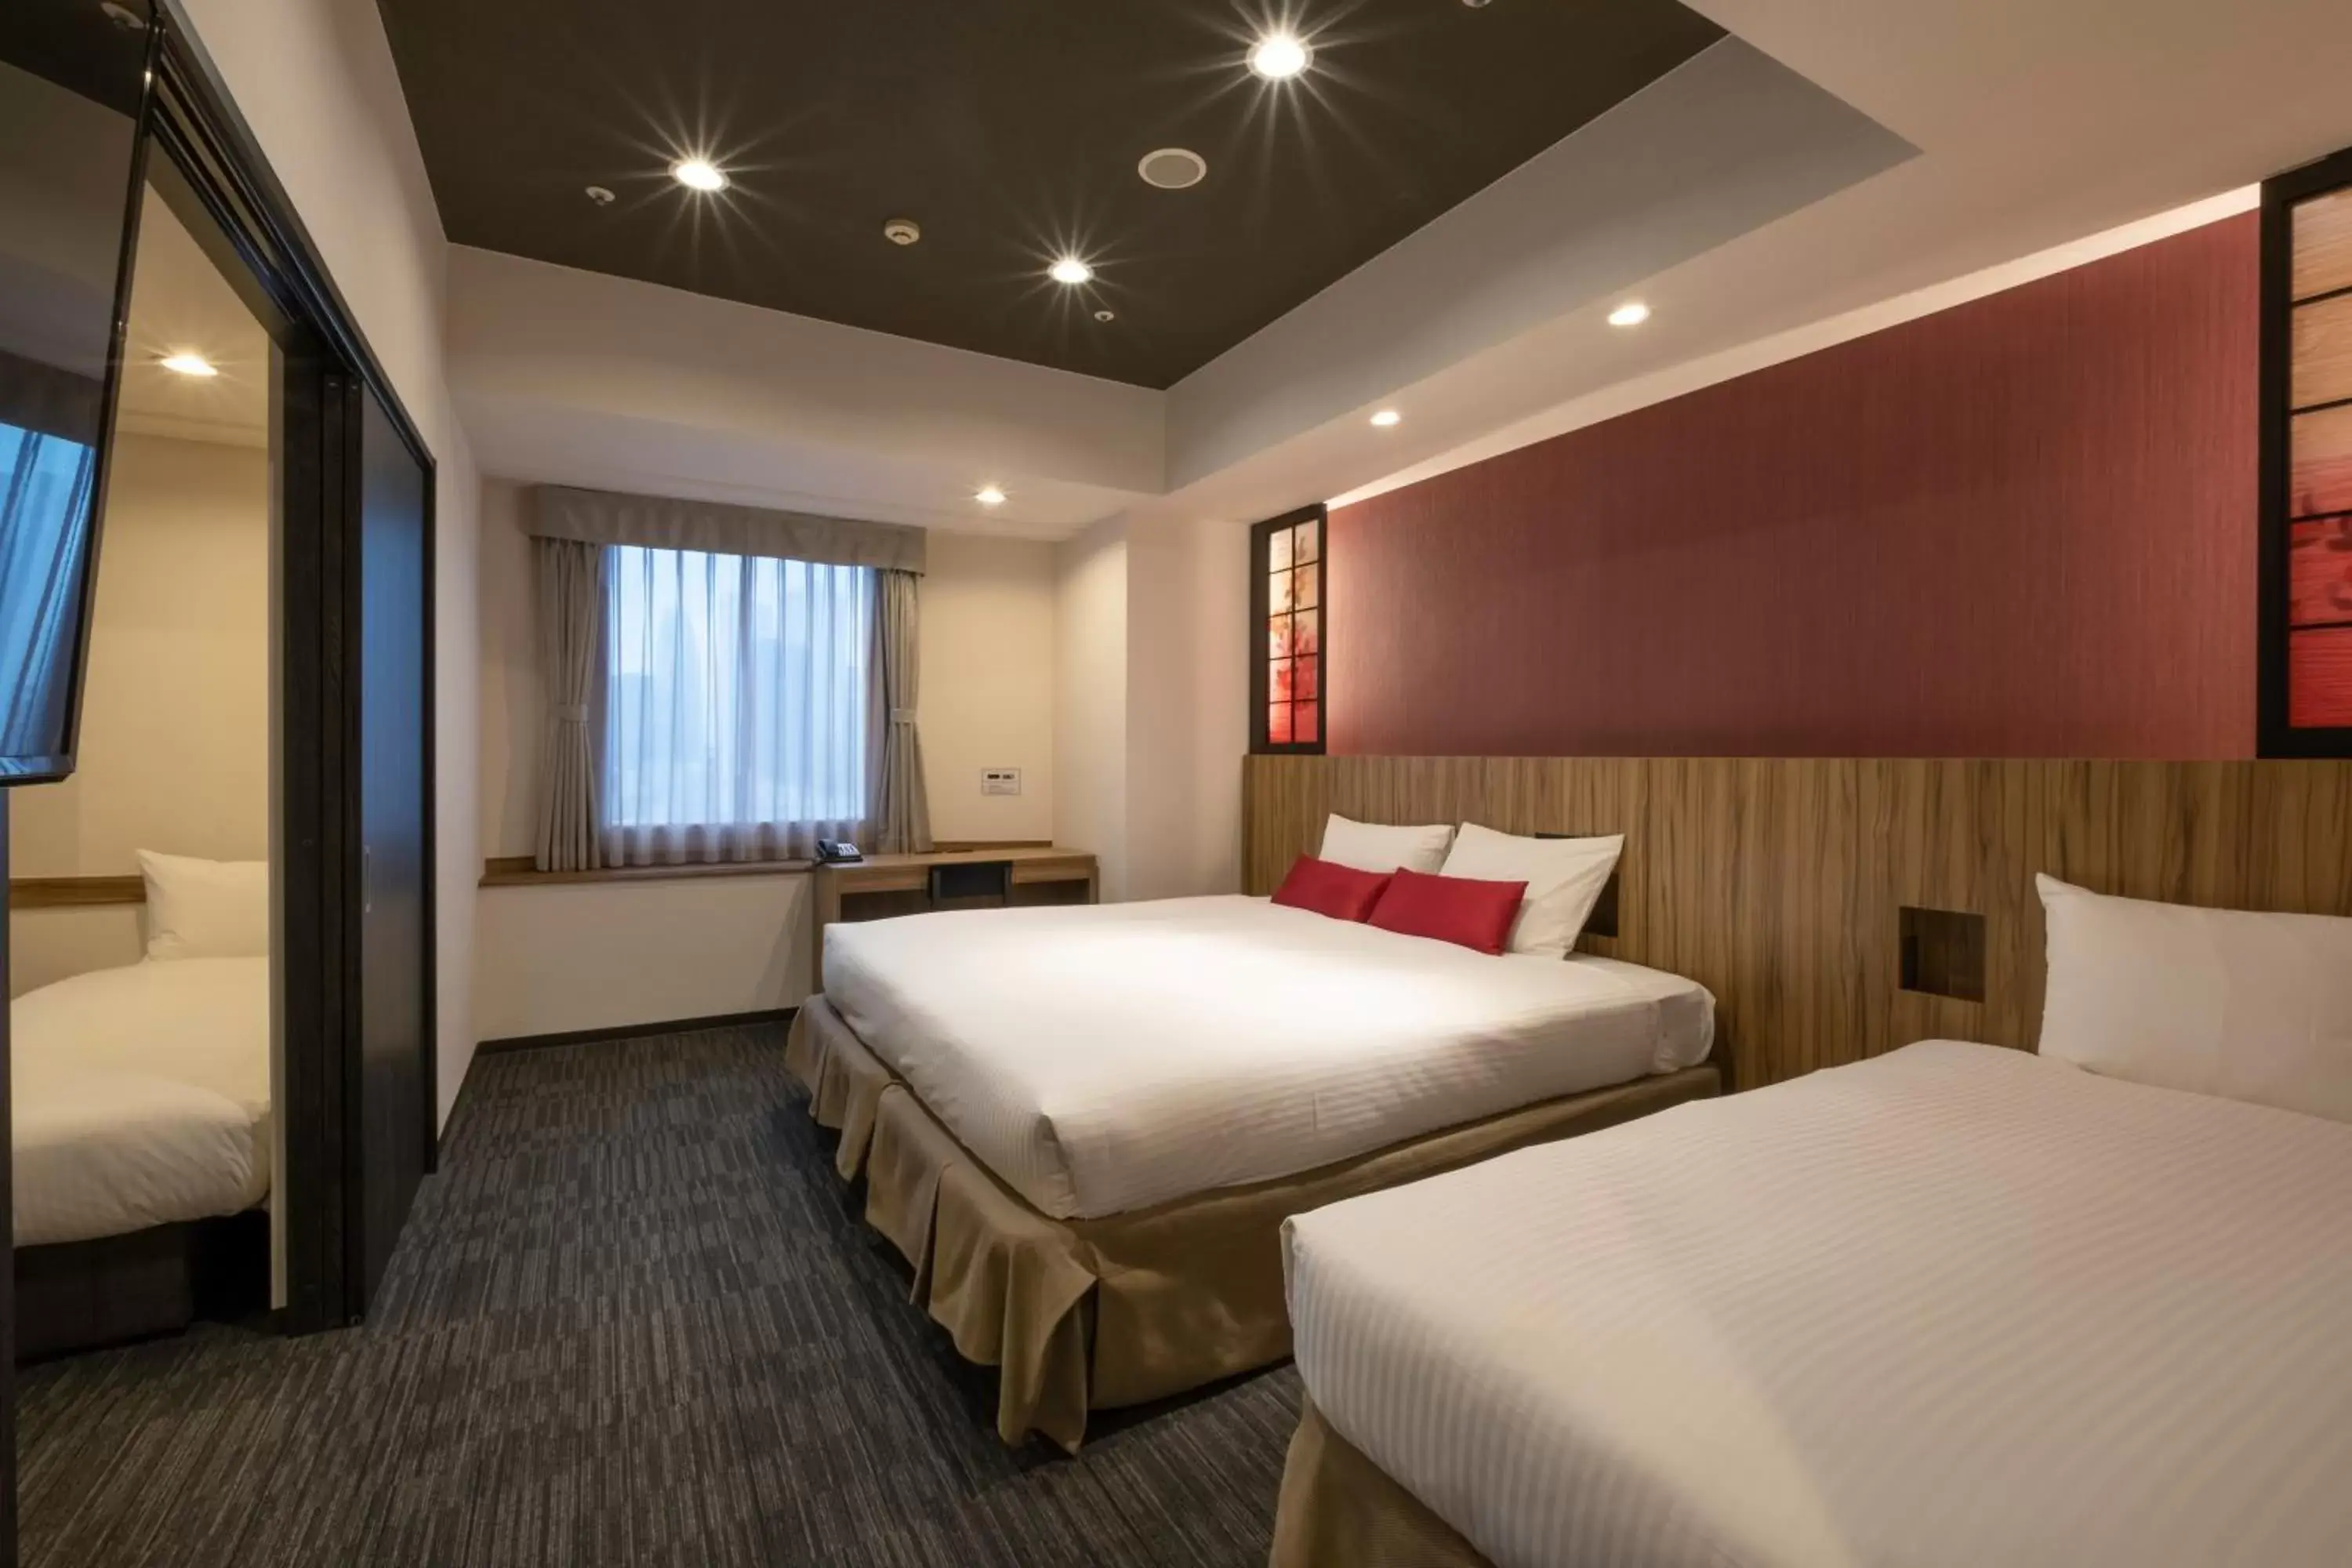 Junior Suite for 4 people - Cleaning every 4 days in Hundred Stay Tokyo Shinjuku